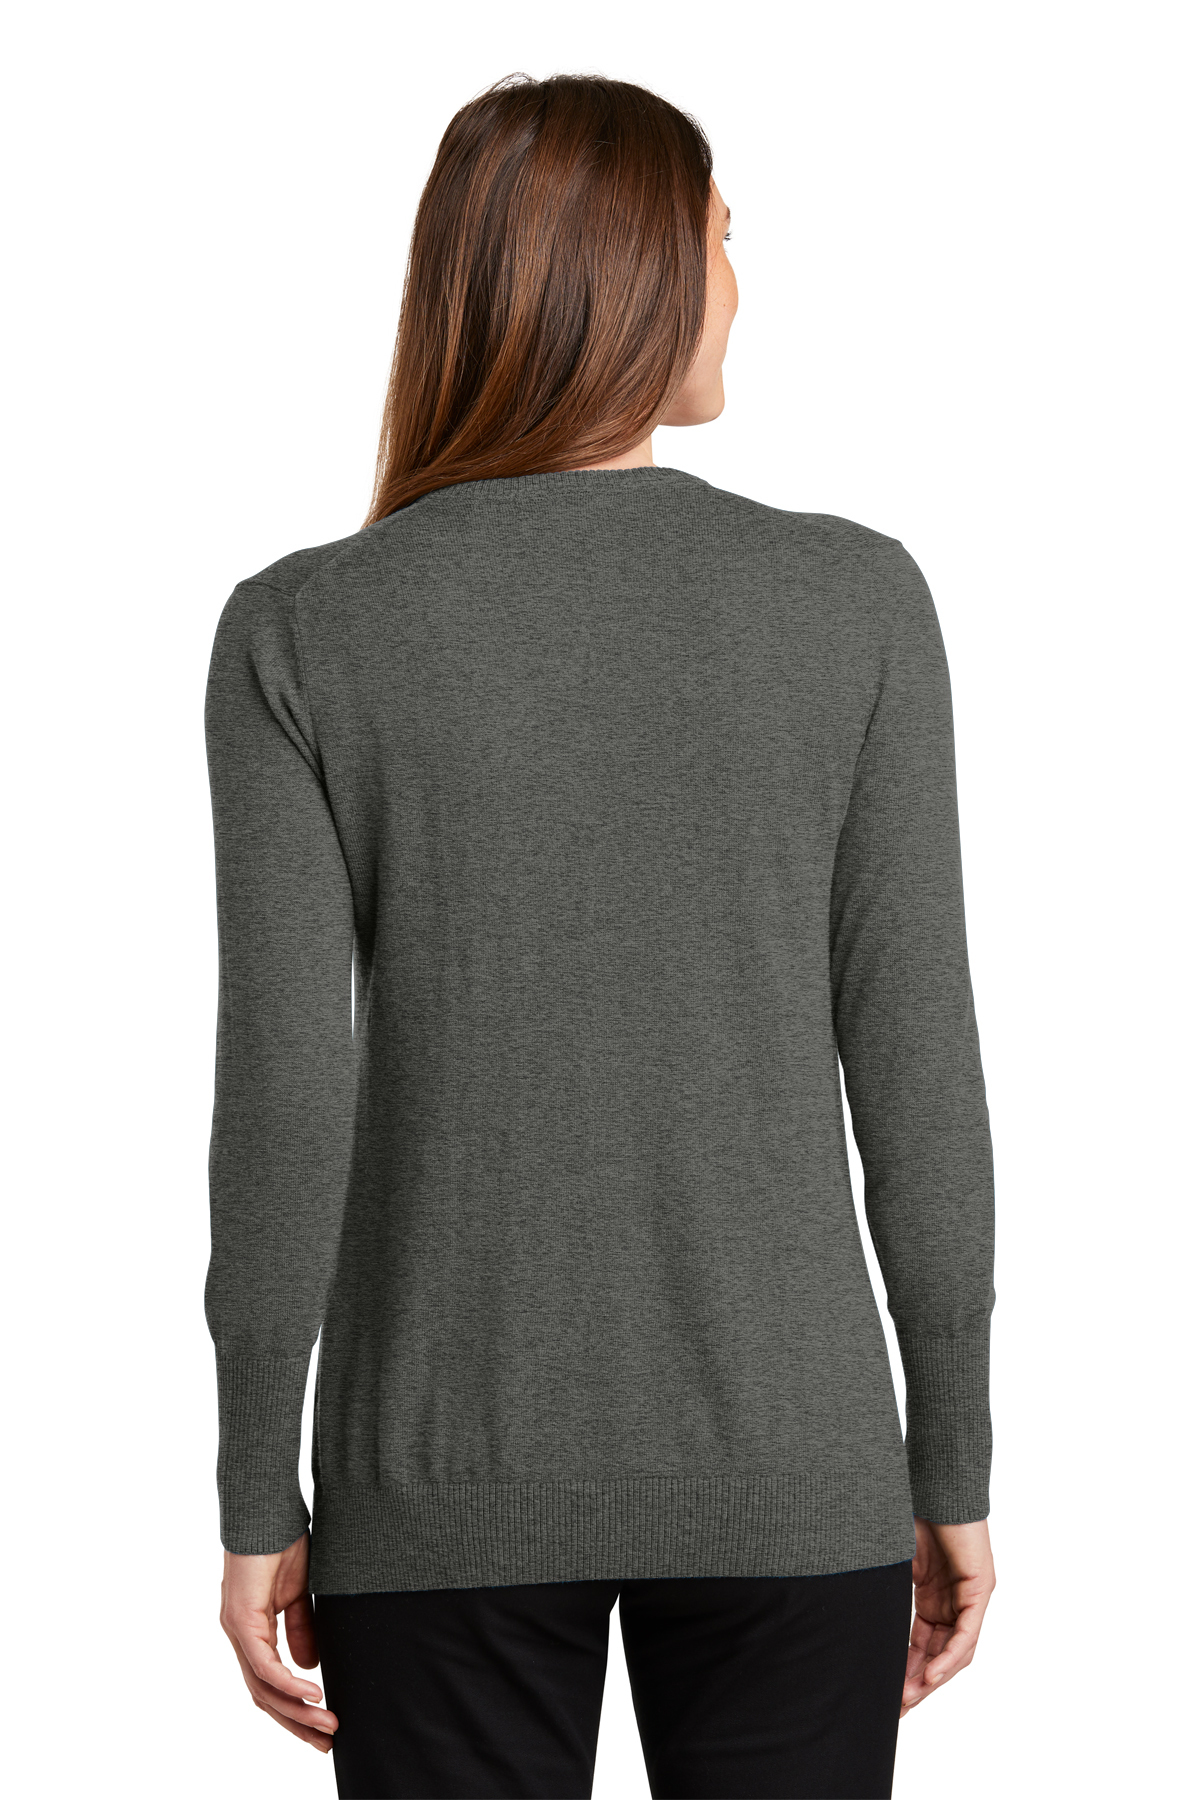 Port Authority Ladies V-Neck Sweater | Product | Company Casuals